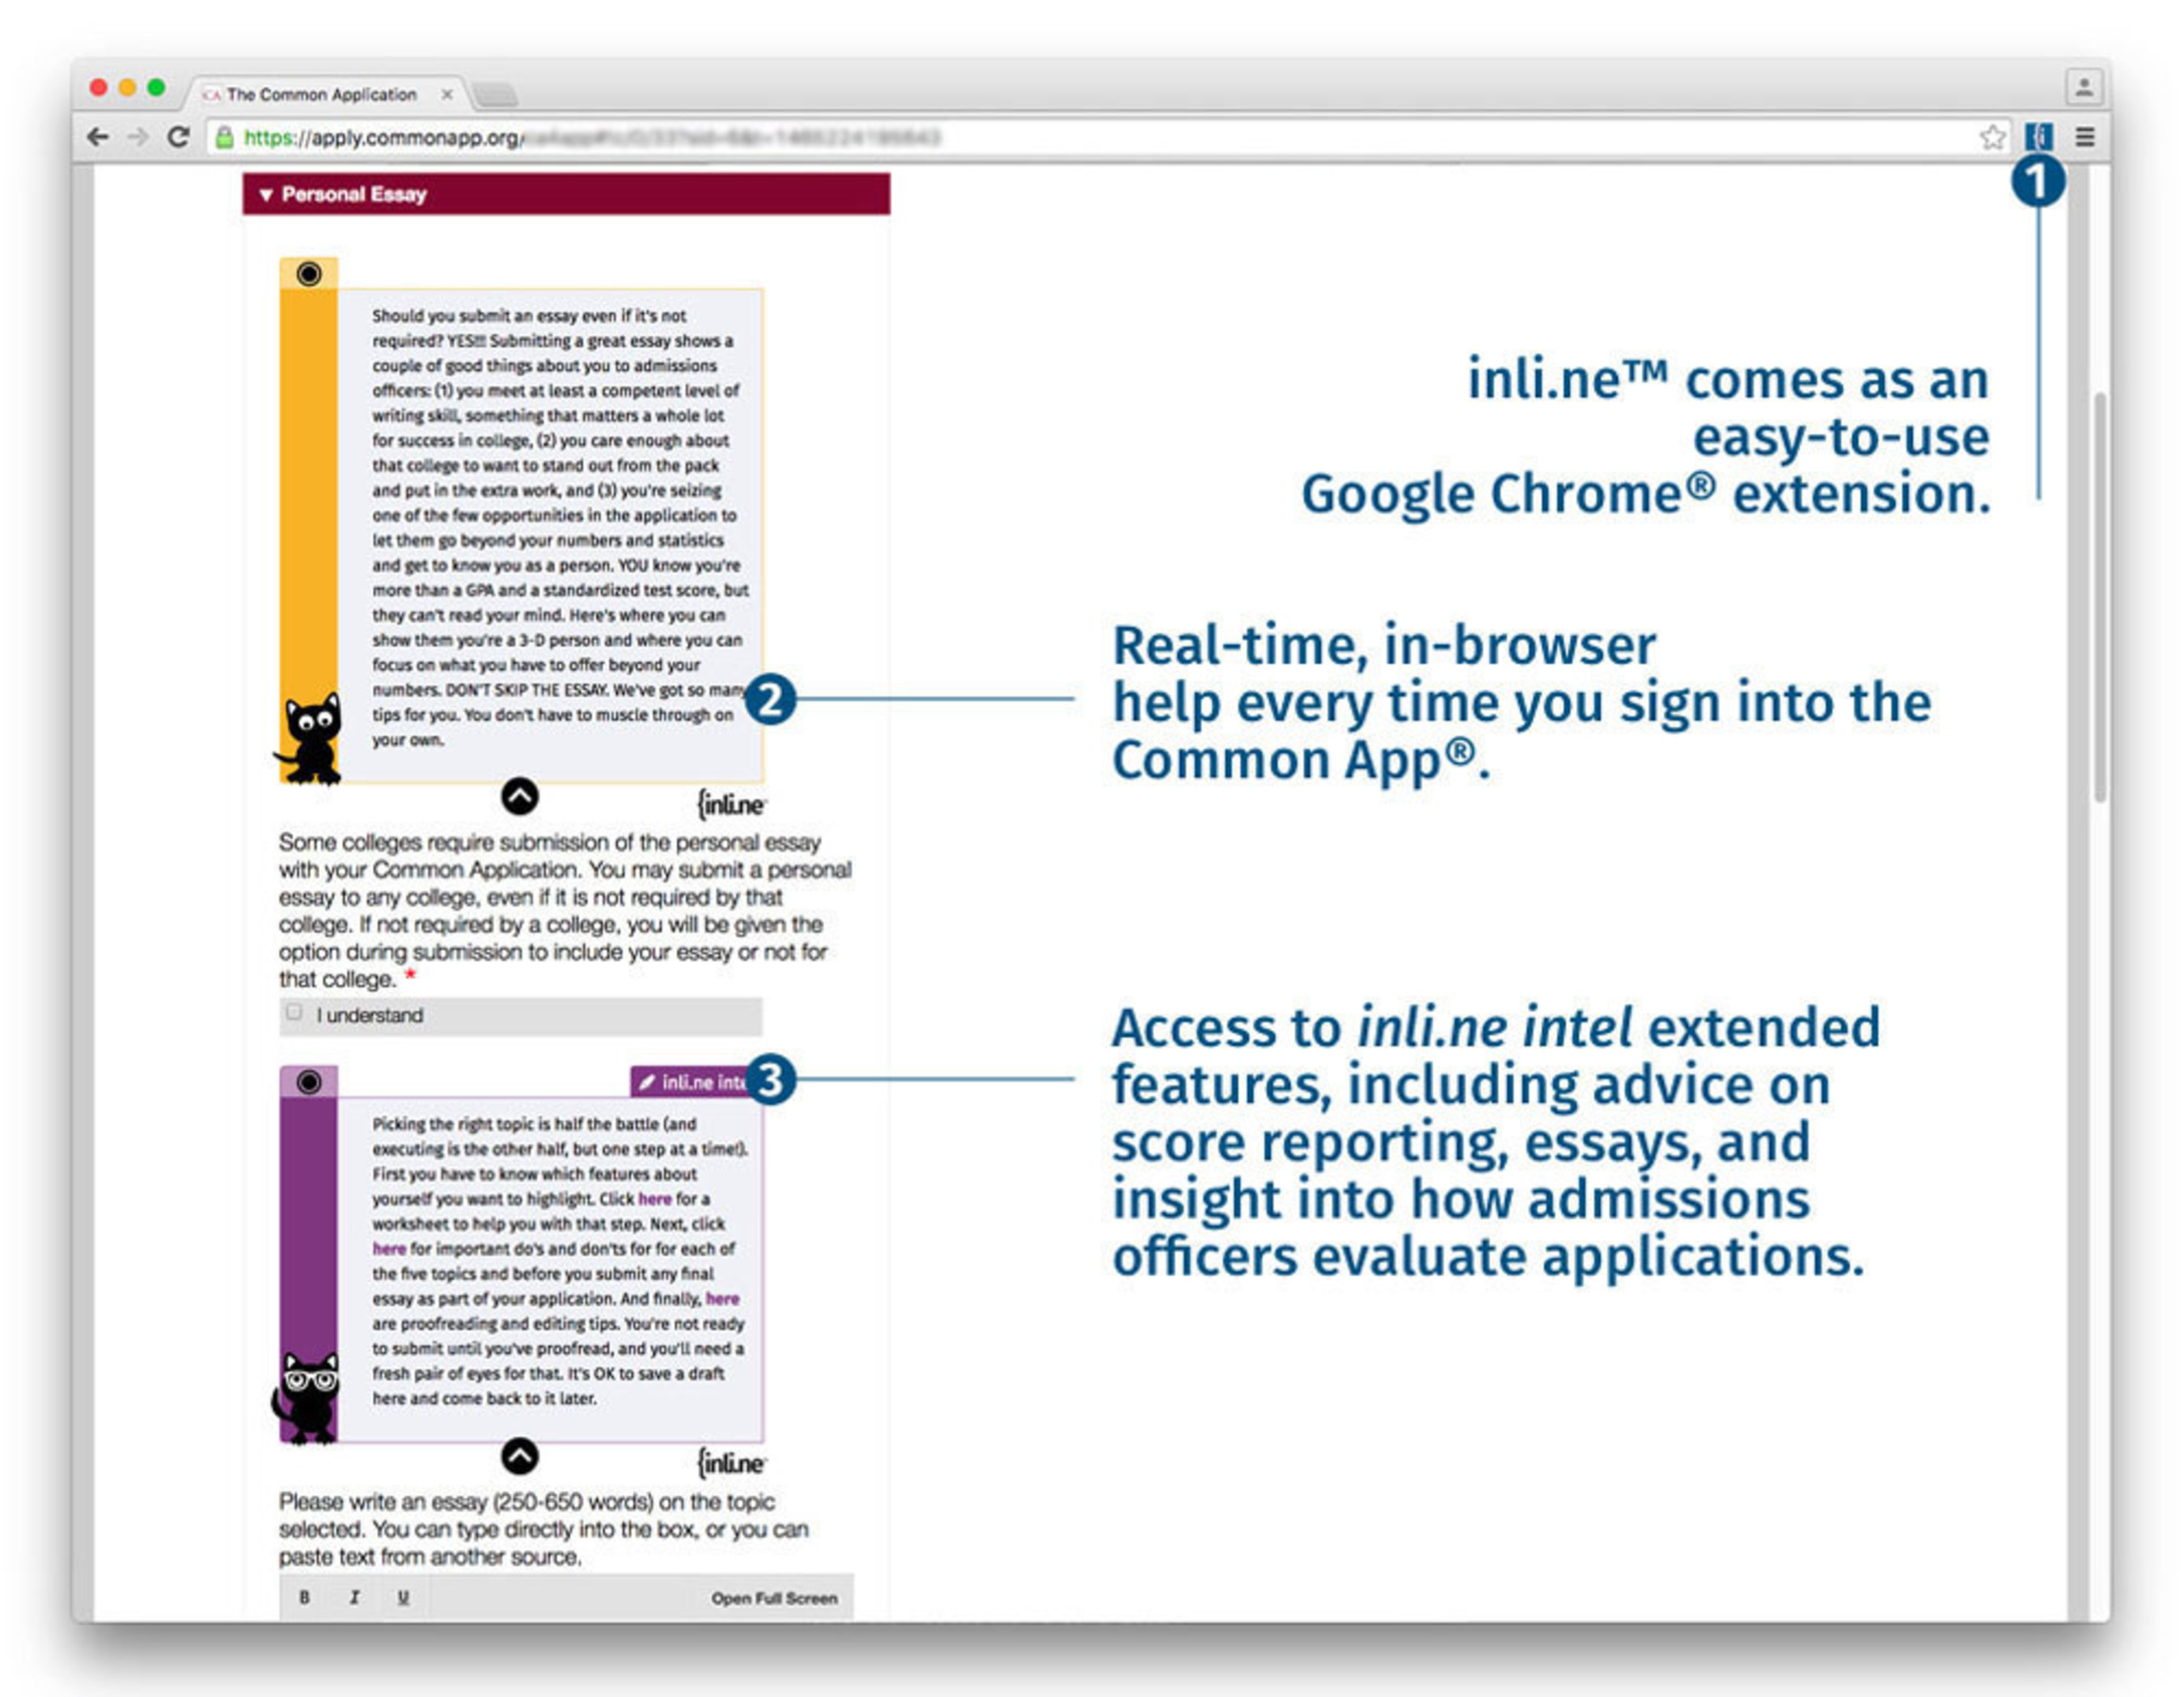 inli.ne(TM) is an easy-to use Chrome extension that opens automatically when you open the Common App(R)